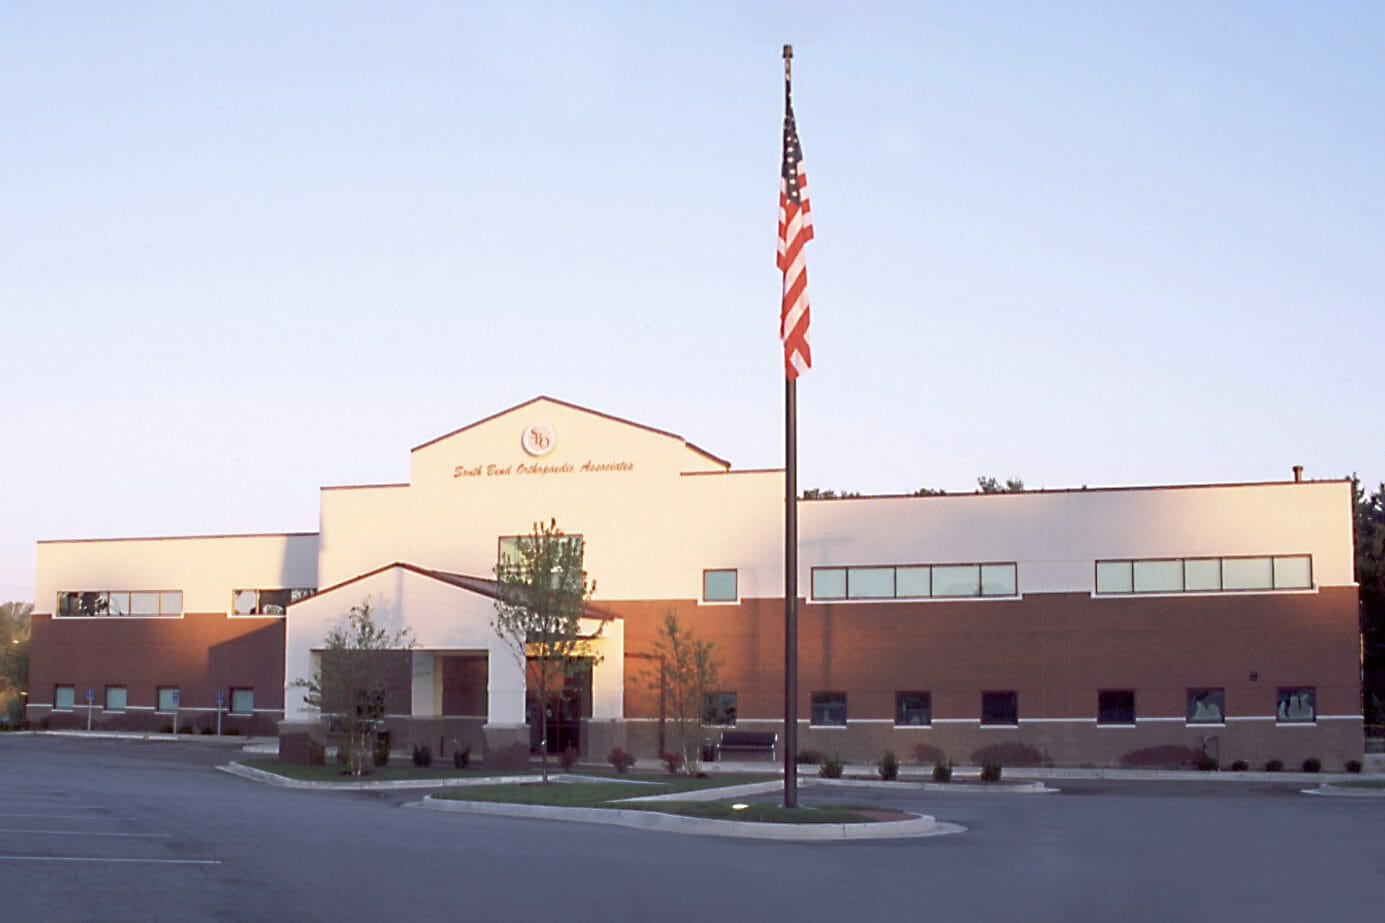 Exterior front view of the two-story, South Bend Orthopedic Associates building with stucco and brick finishes, a porte-cochère, and tall flag pole with the American flag on it